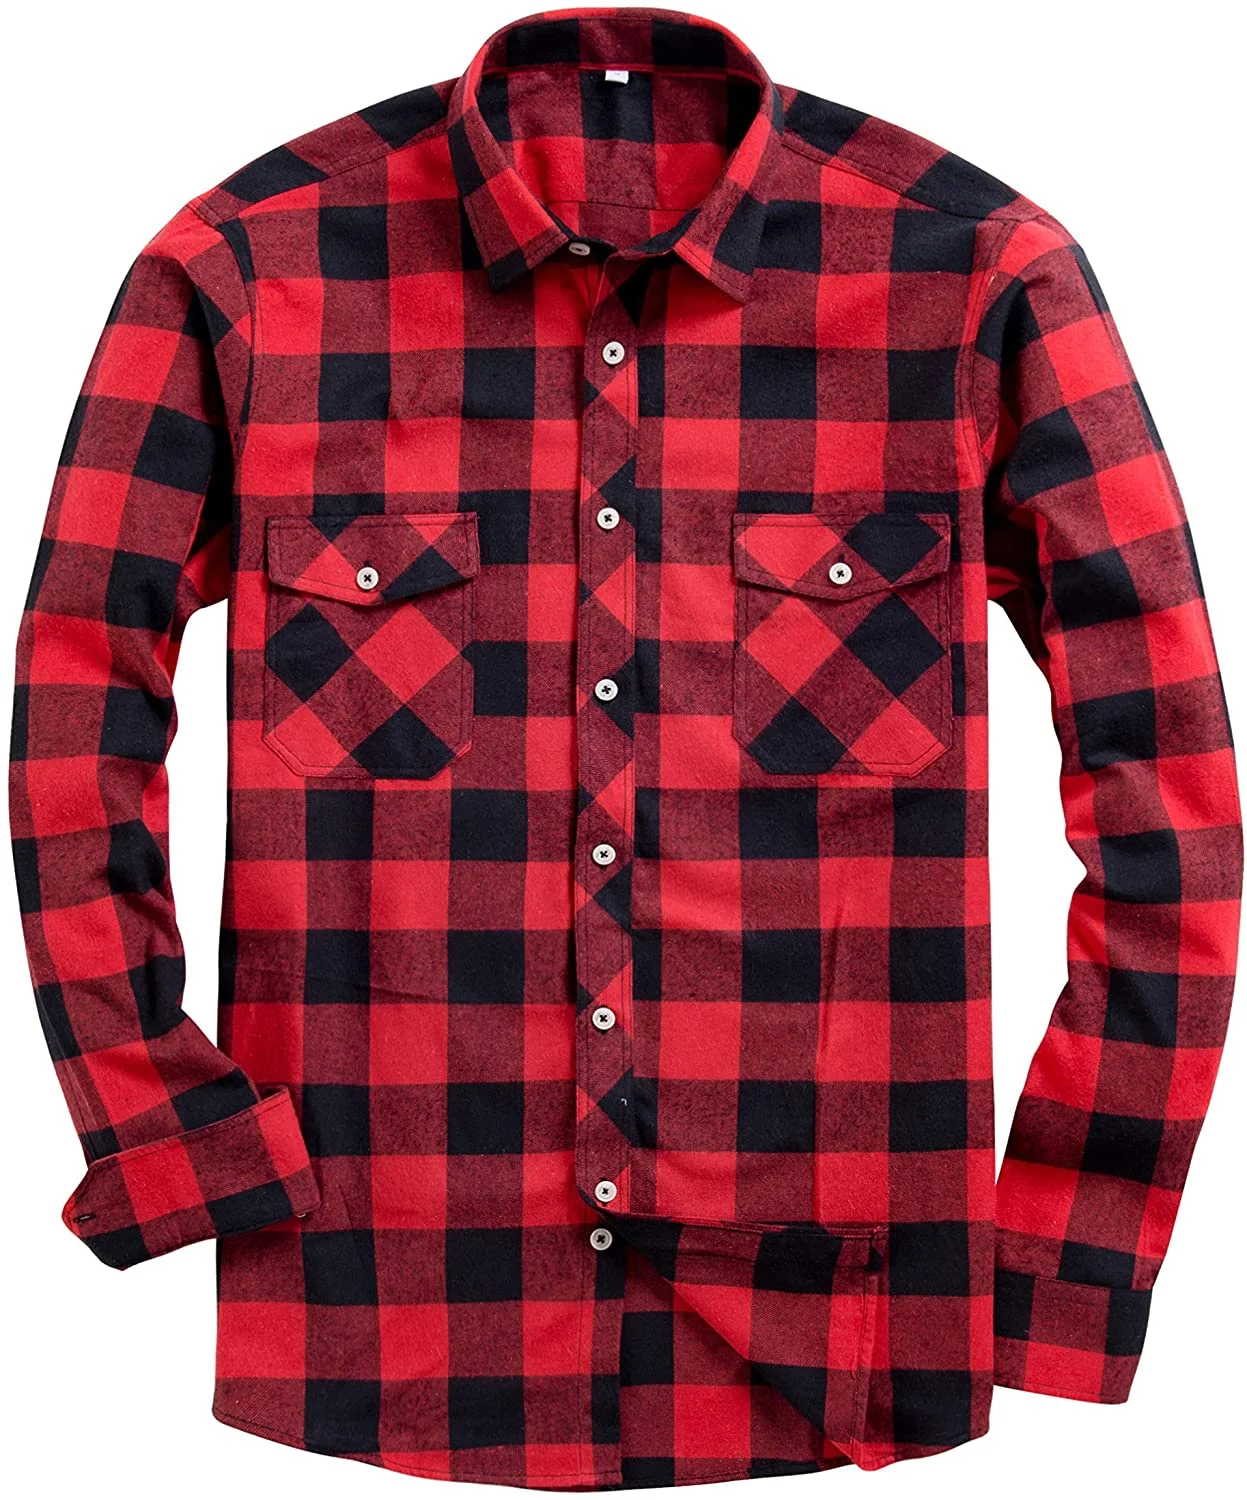 Men's Regular Fit Plaid Flannel Casual Shirts from Bangladesh Garments Exporter